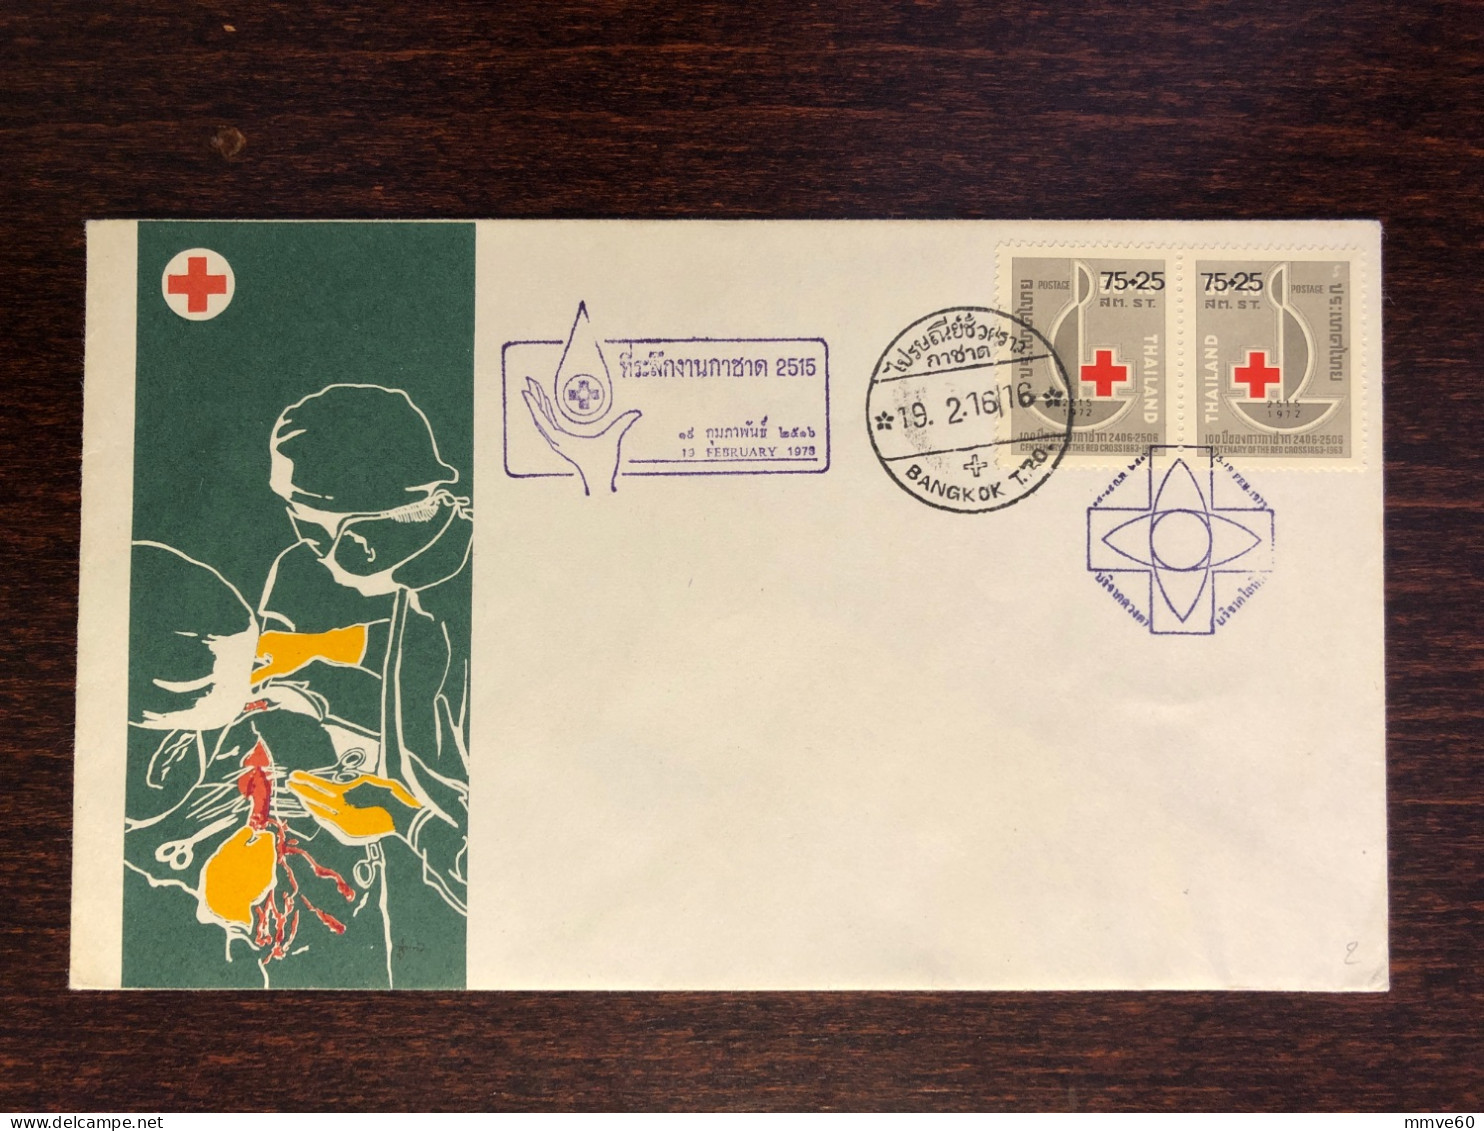 THAILAND FDC COVER WITH OVERPRINTS 1973 YEAR RED CROSS HEALTH MEDICINE STAMPS - Thailand